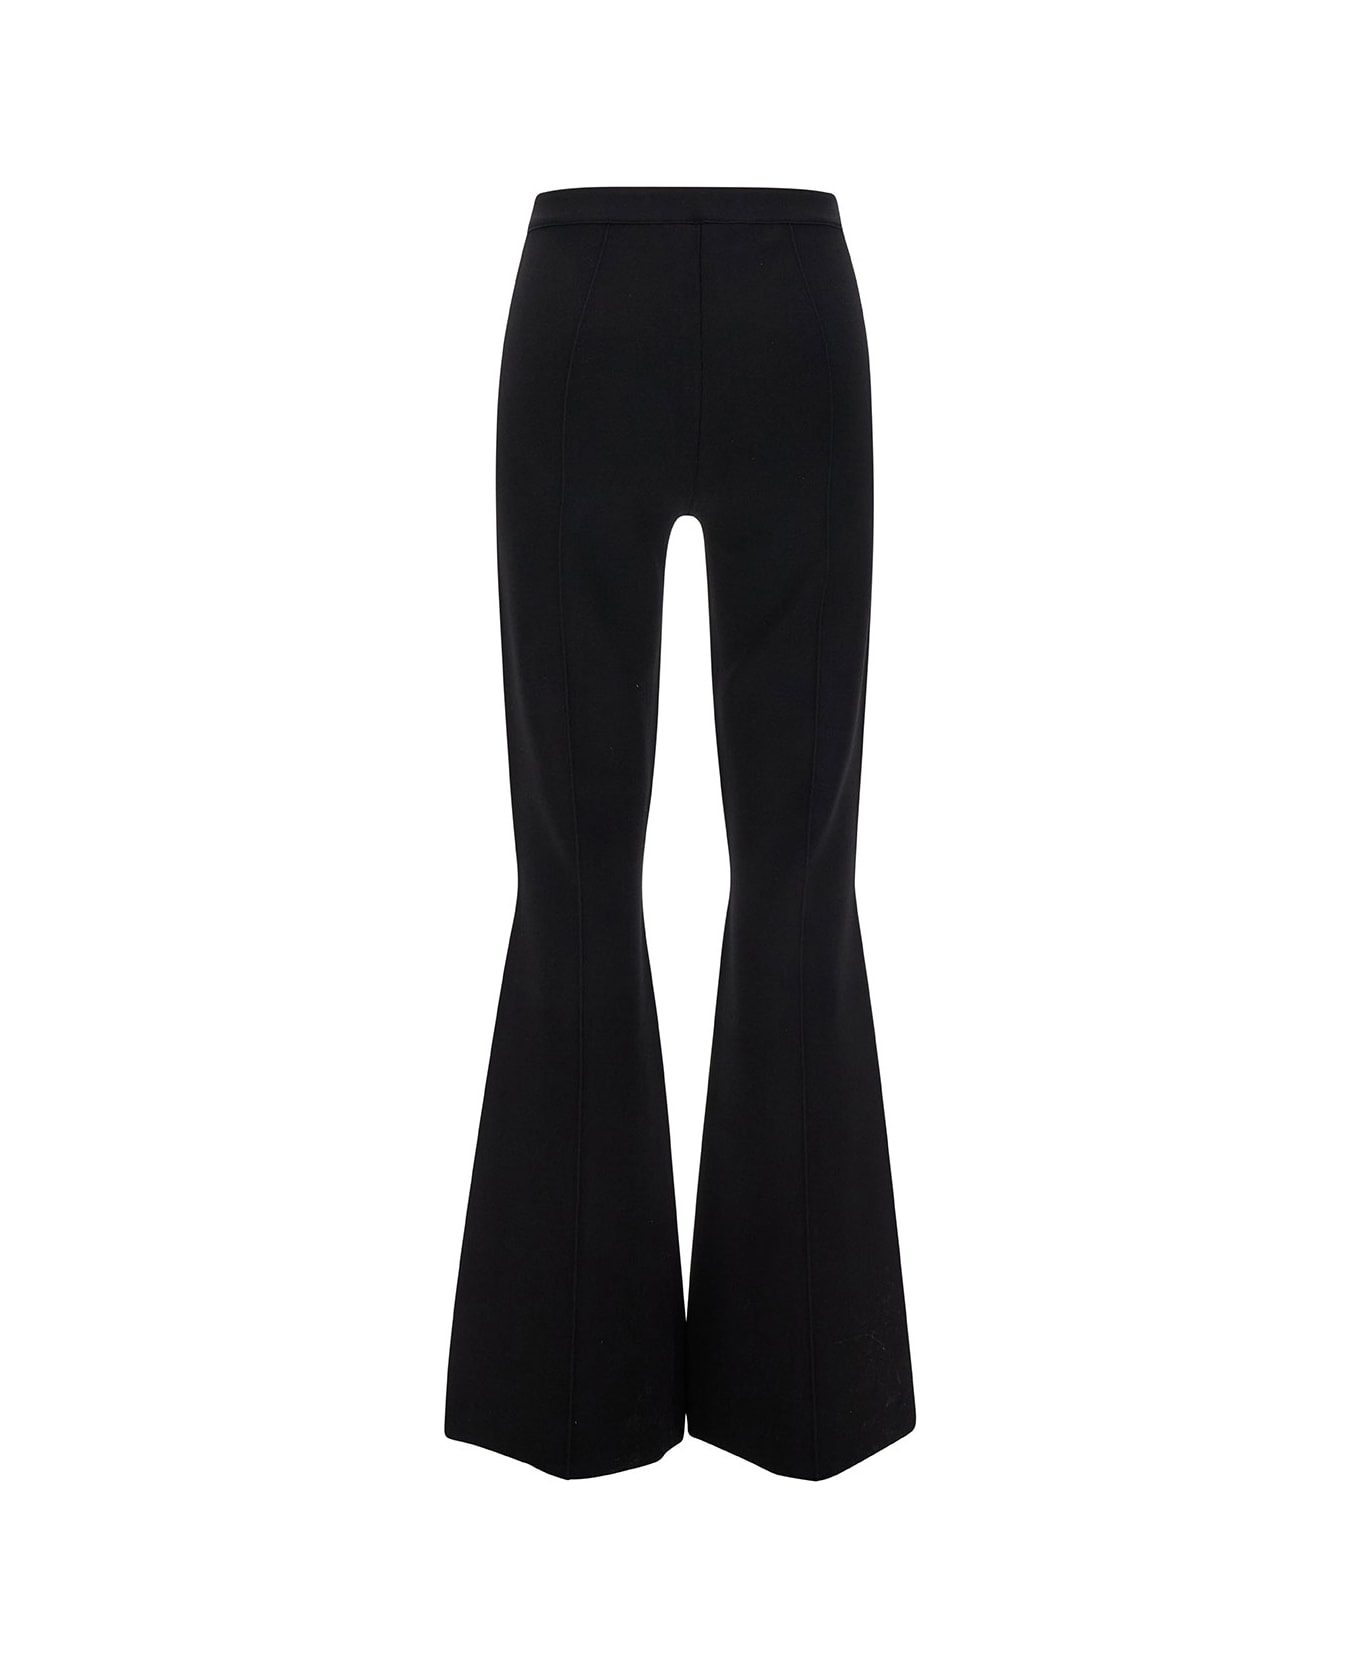 Theory Black Flared Pants With Button Closure In Viscose Blend Woman - Black